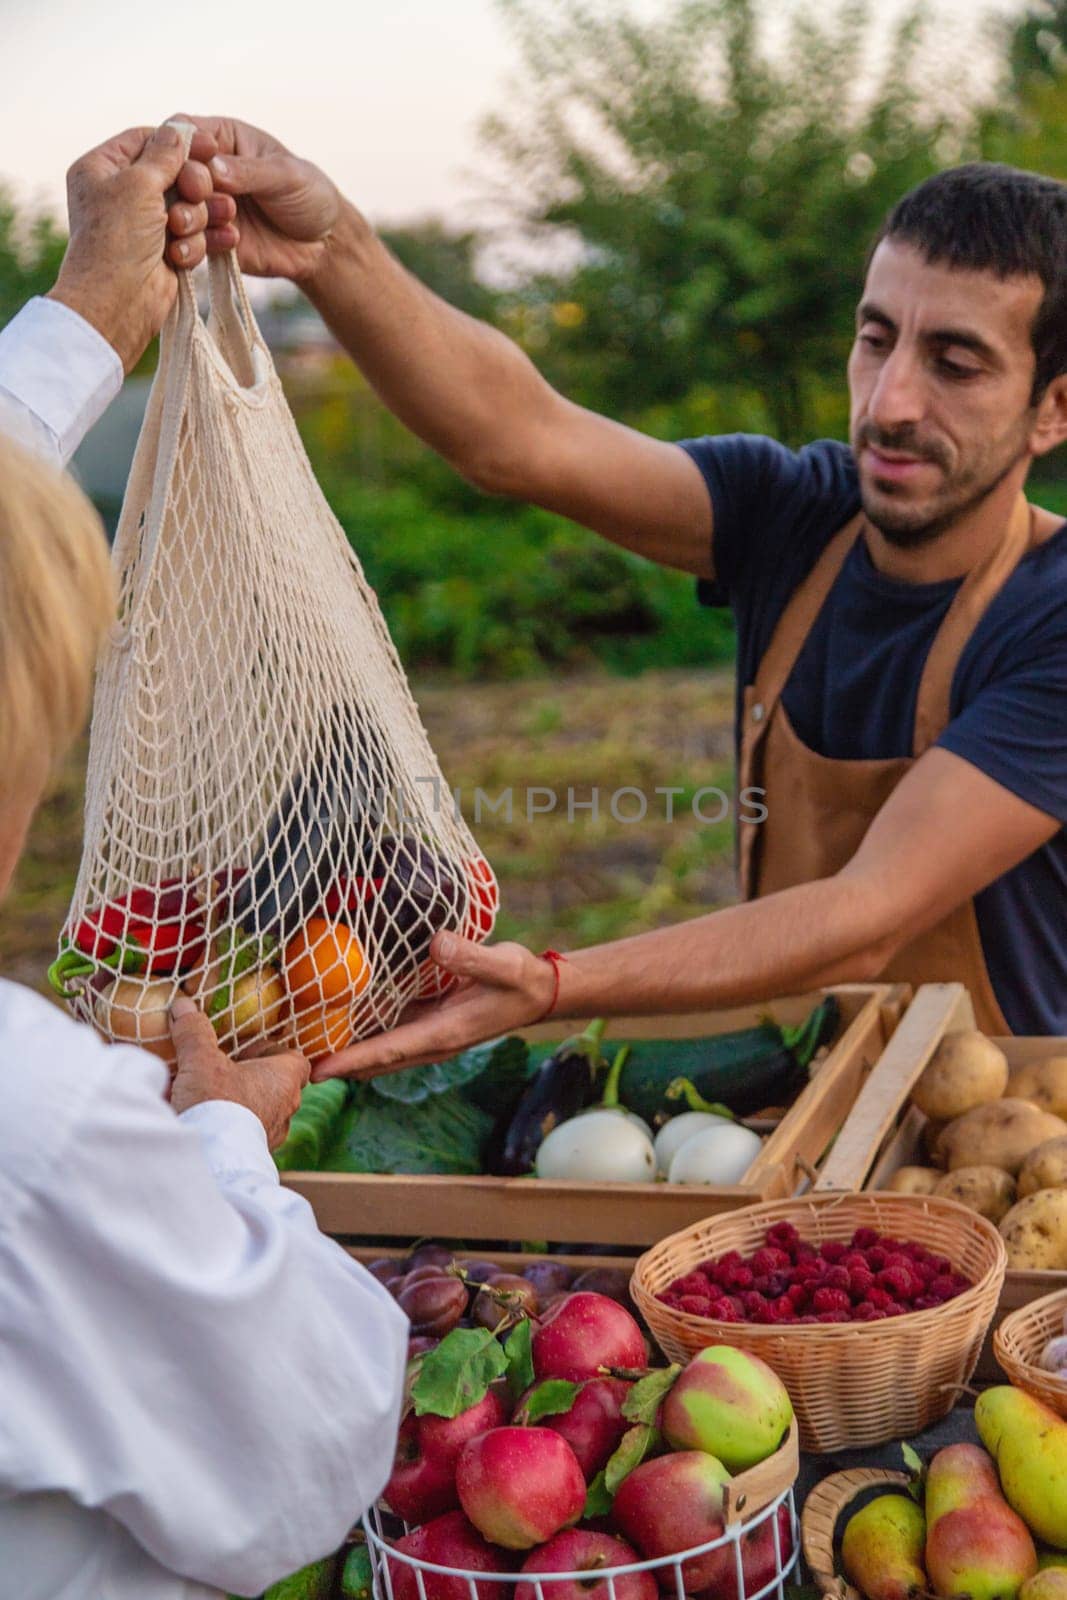 The farmer sells fruits and vegetables at the farmers market. Selective focus. by yanadjana